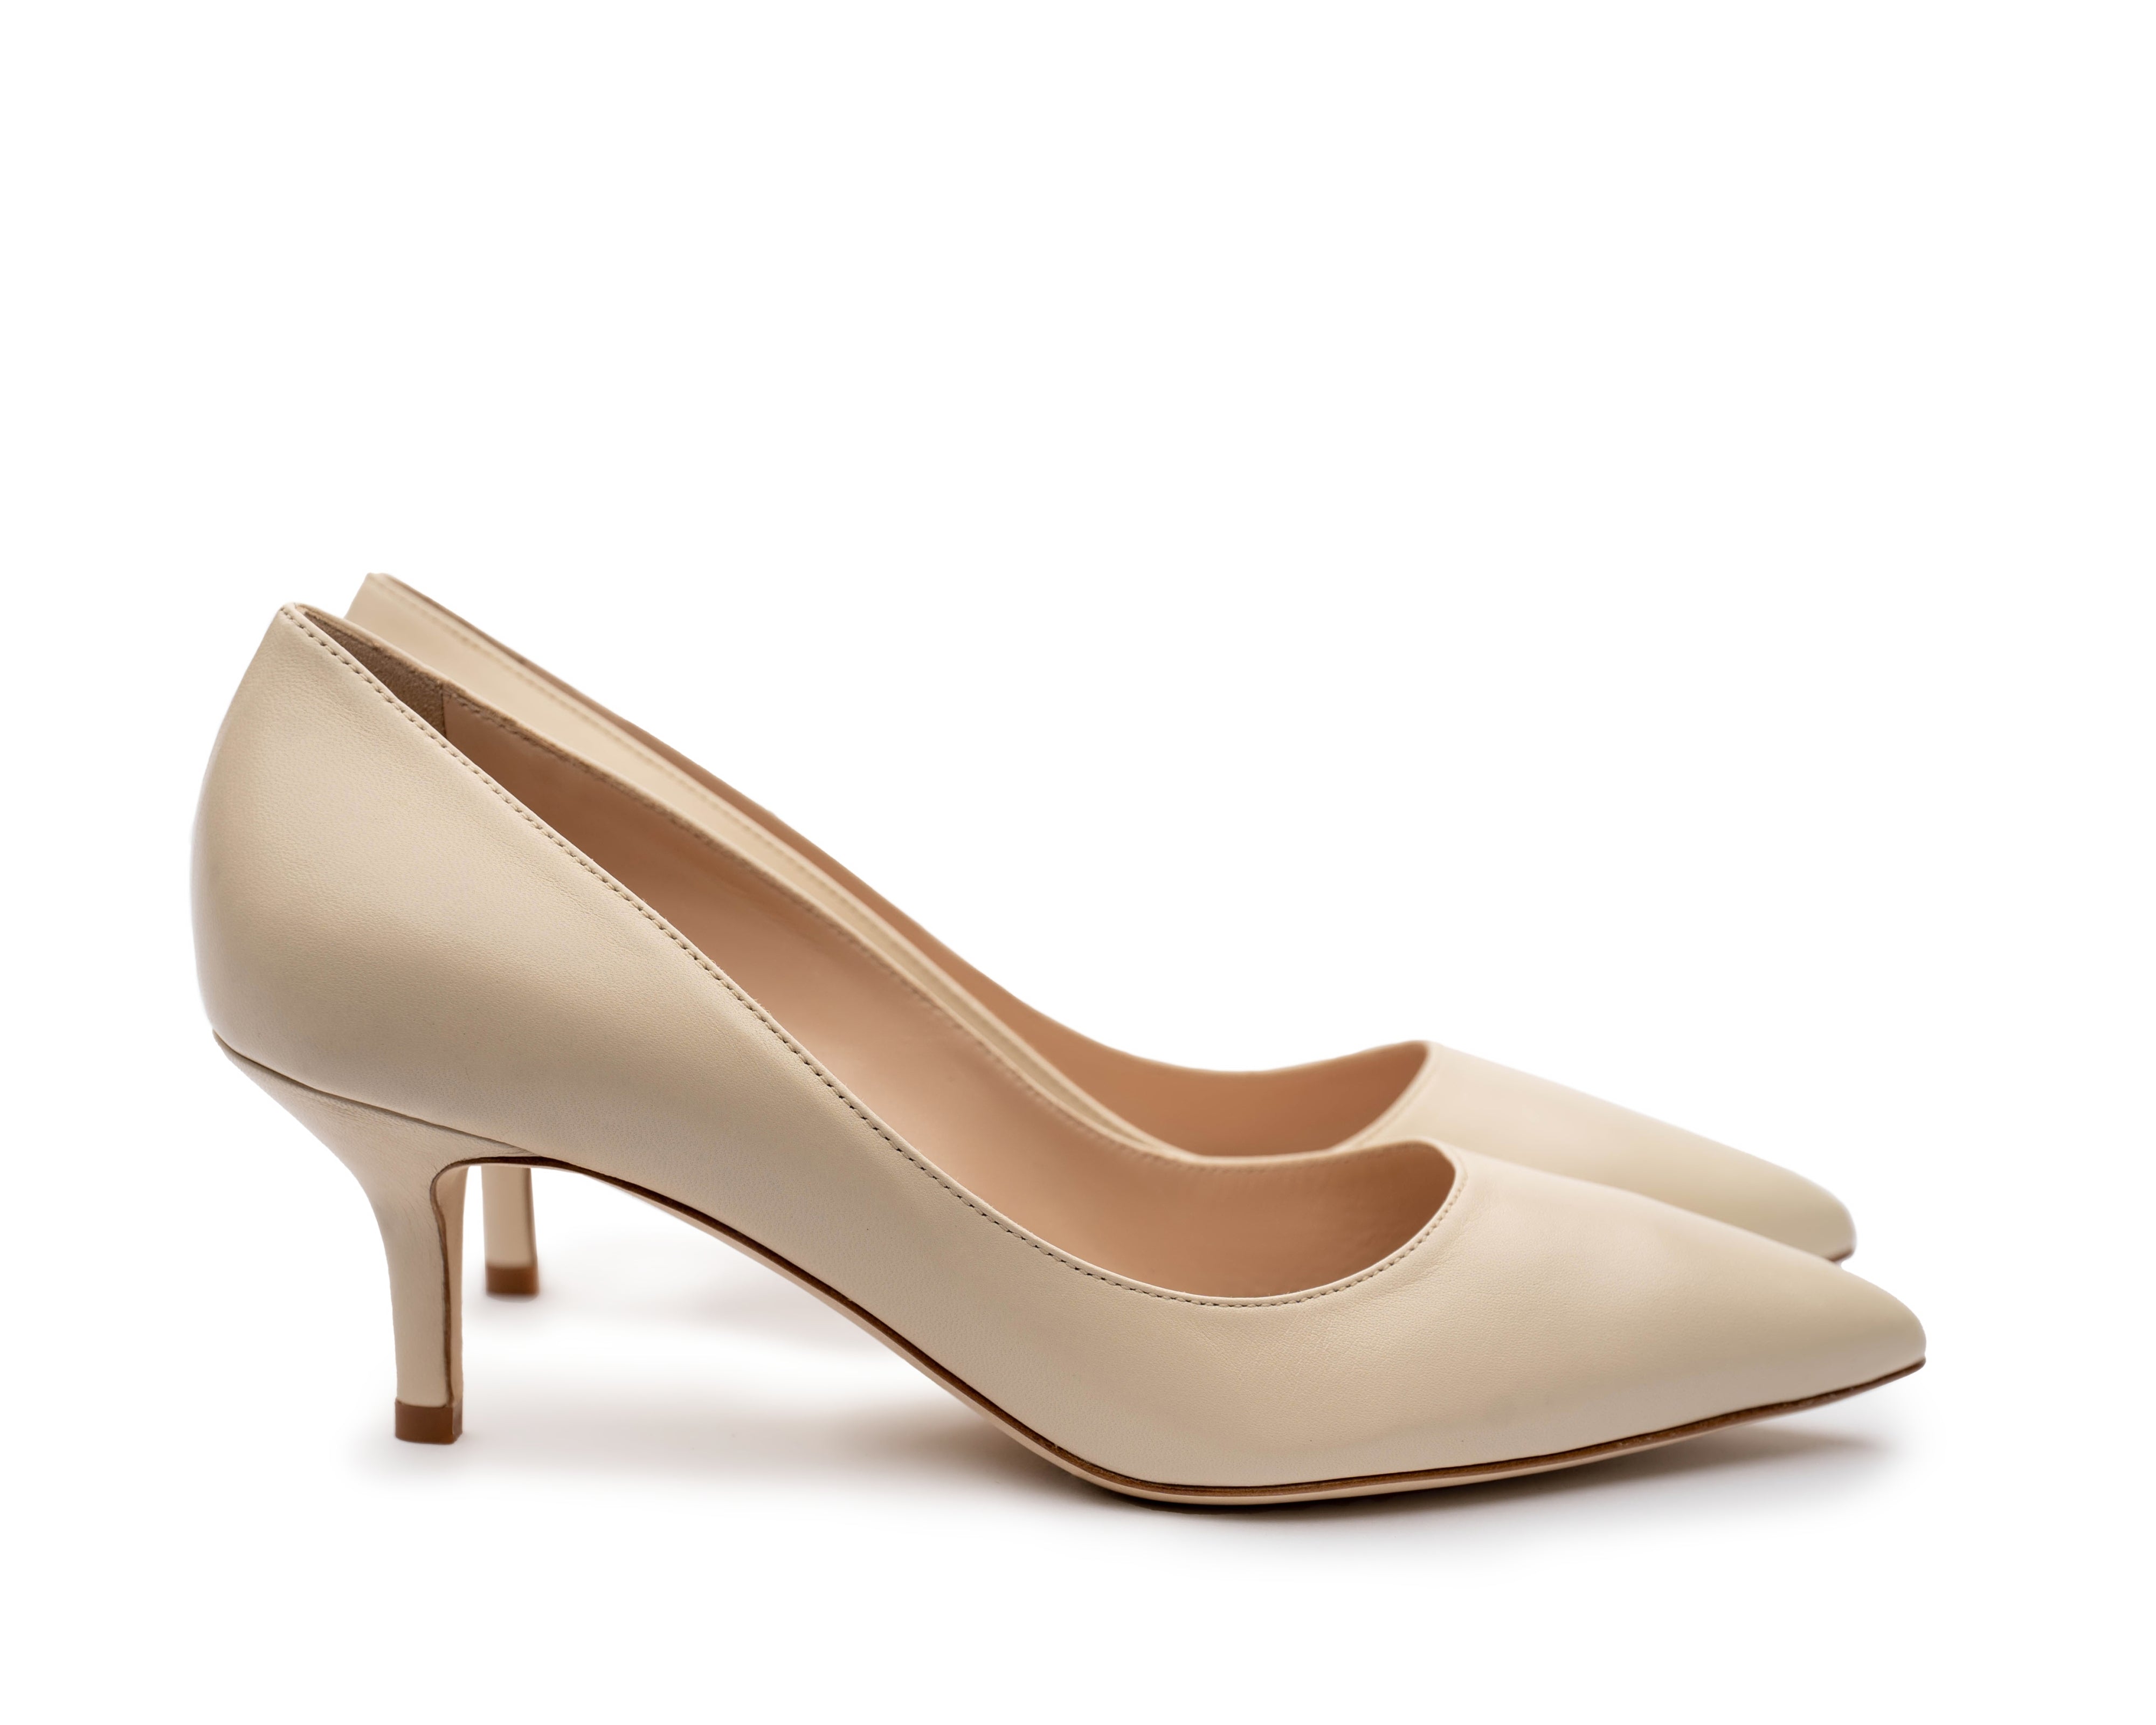 Cushioned insole women's heel comfortable Italian nude pumps. White business shoes.